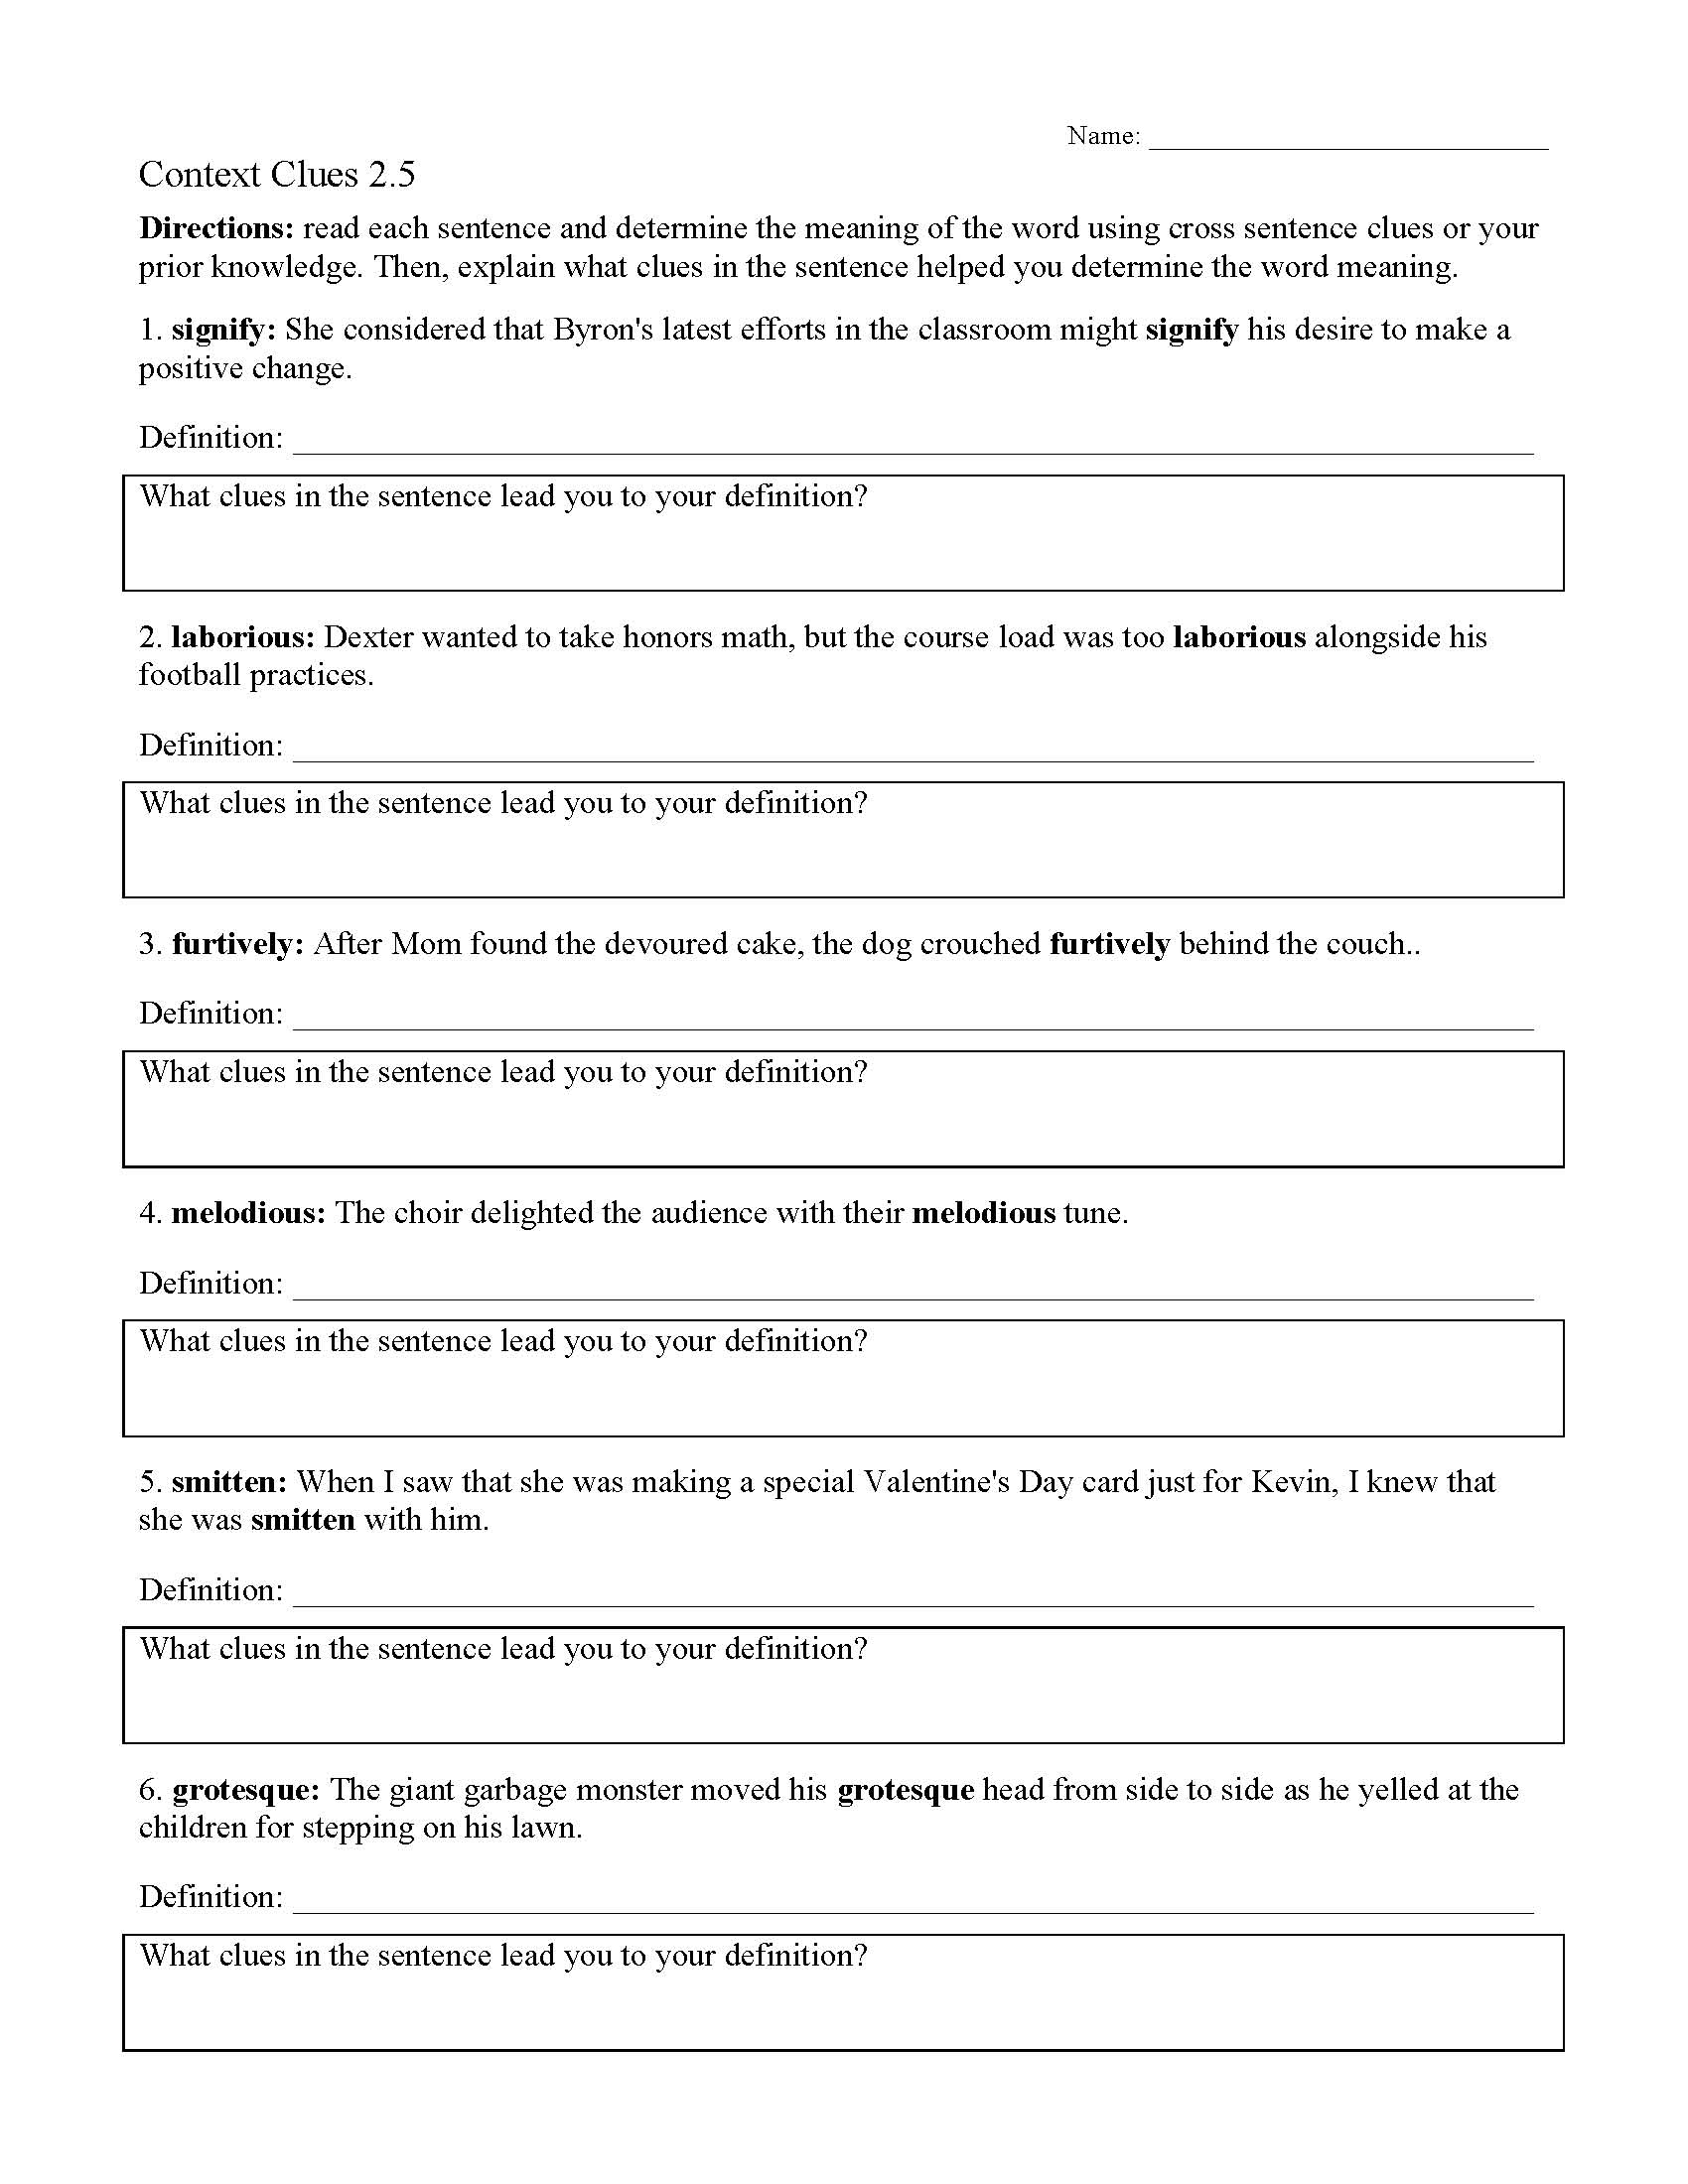 context-clues-worksheets-for-3rd-grade-your-home-teacher